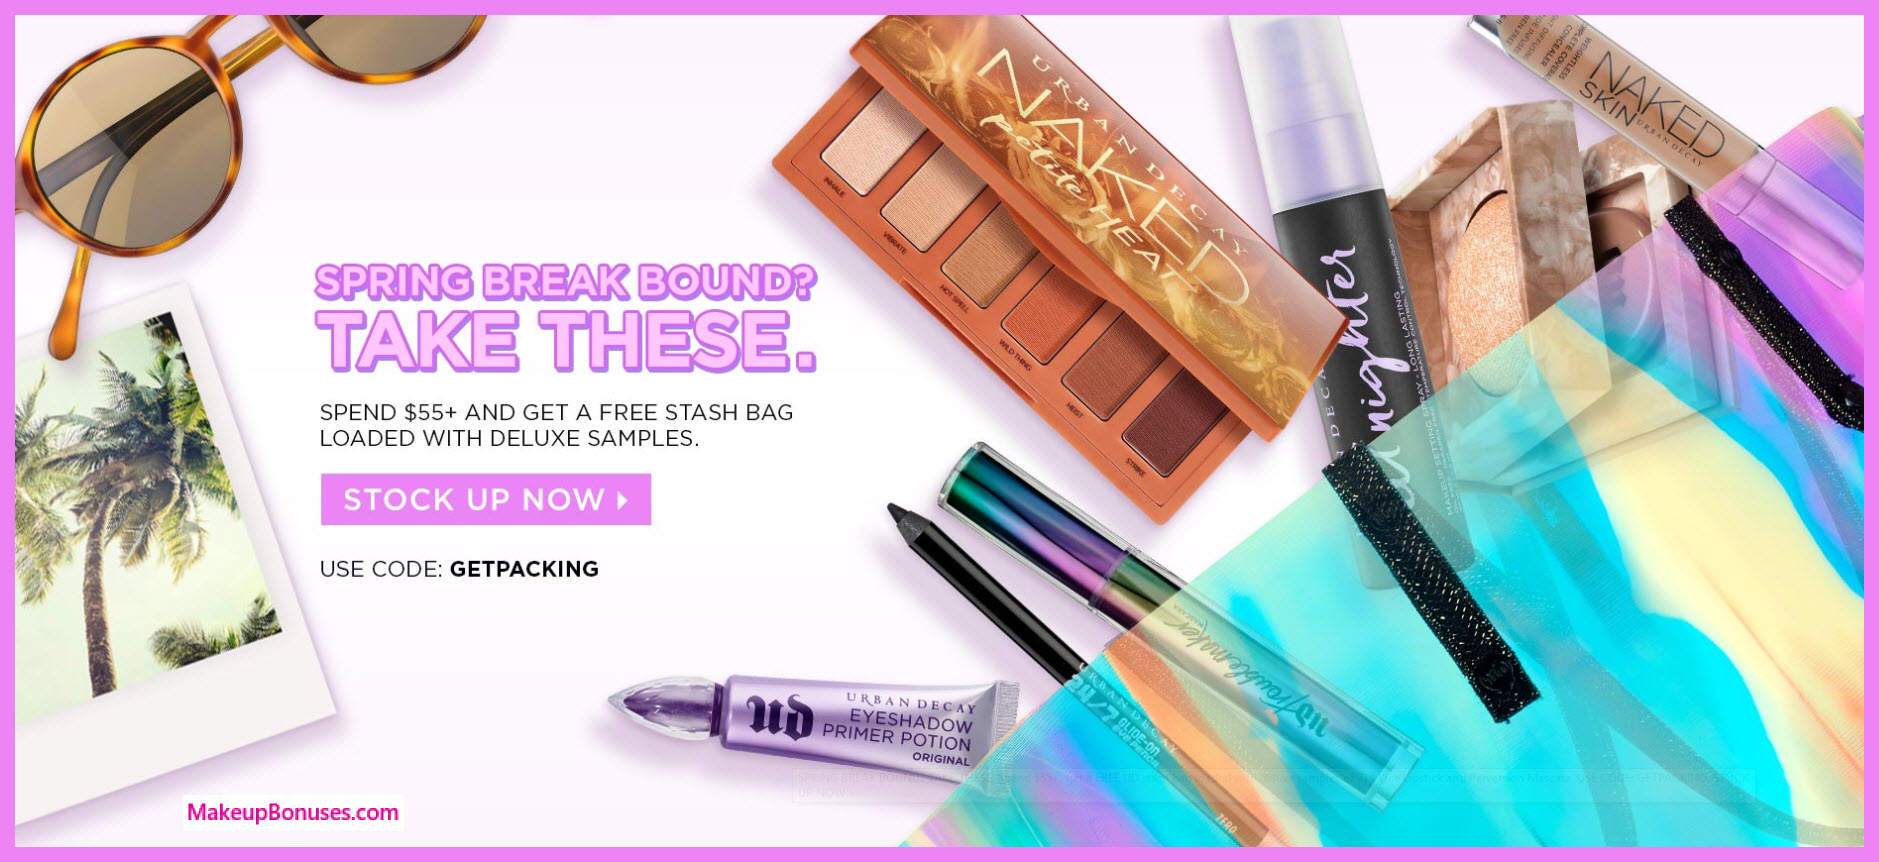 Receive a free 3-pc gift with $55 Urban Decay purchase